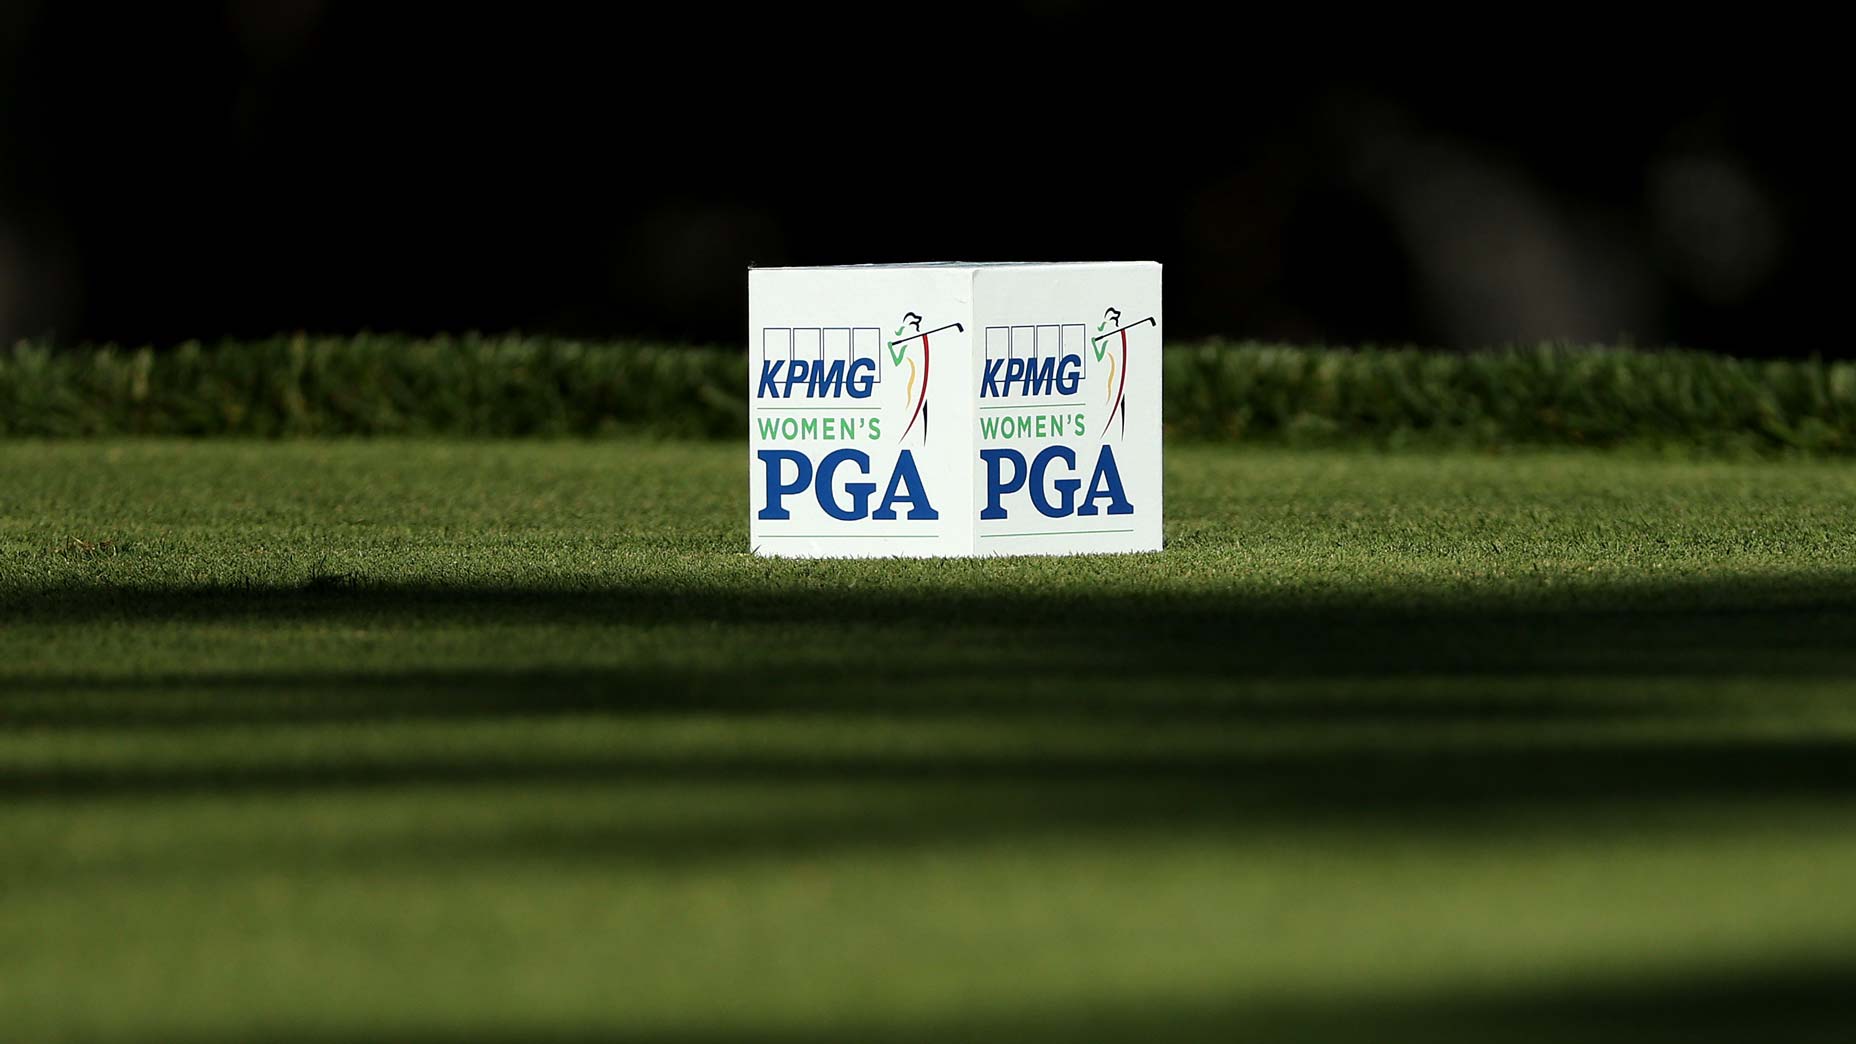 KPMG Womens PGA to employ clever broadcast strategy on Sunday